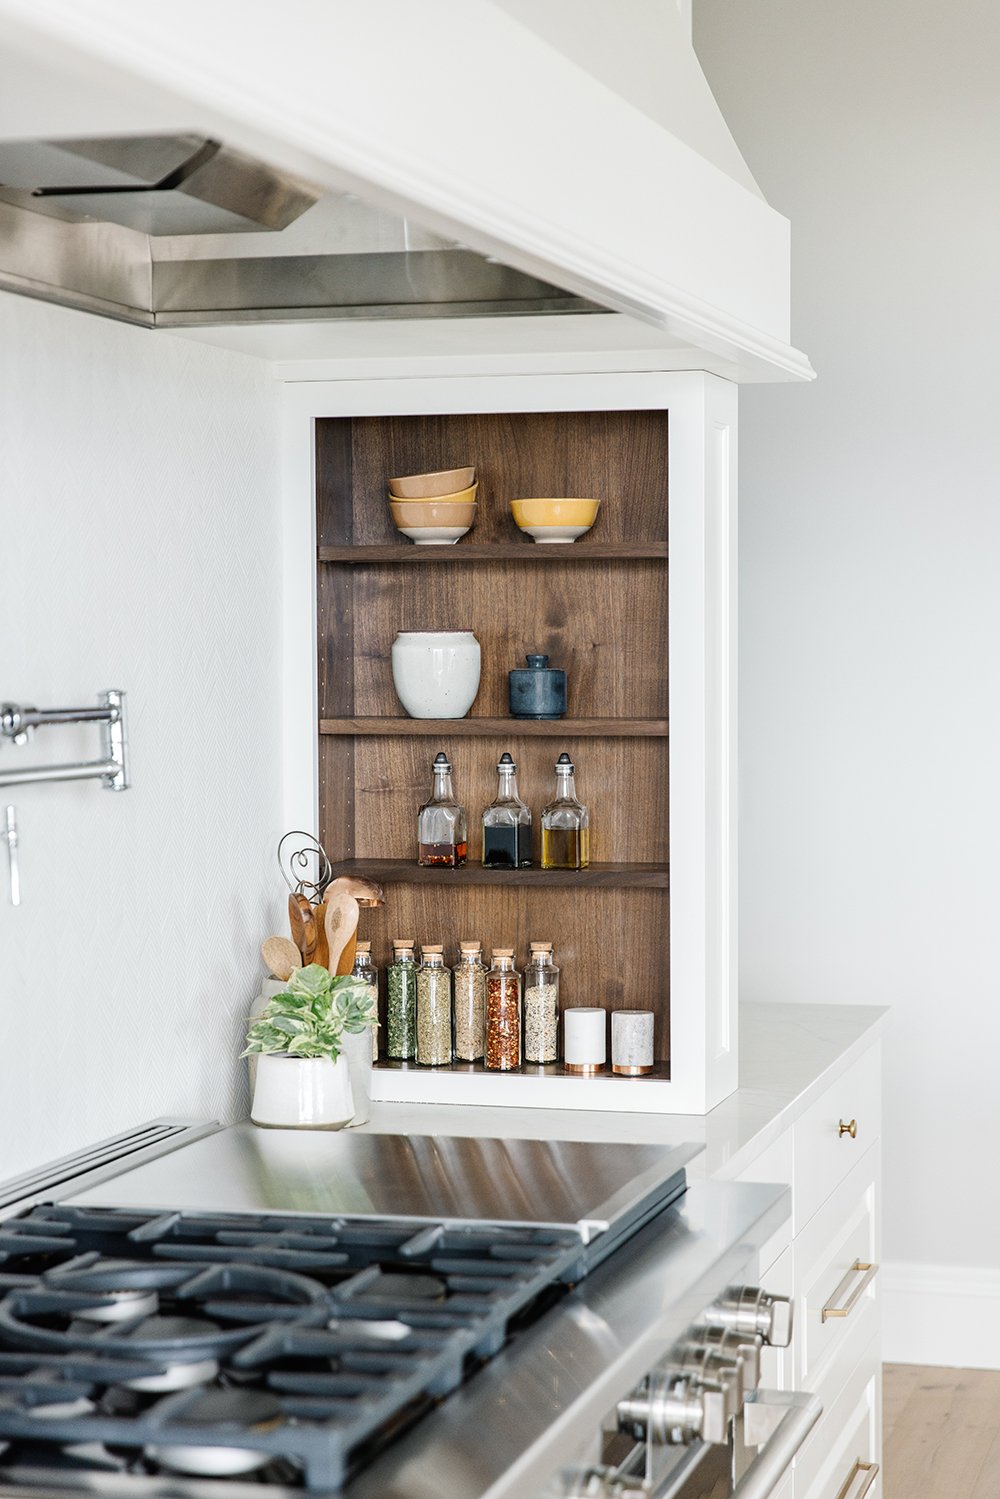  This kitchen uses the dead space of a wall to add built-in shelves next to the range. The wooden coloring is a perfect accent to the crisp white of the kitchen. Kitchen spice shelves dark walnut and white white kitchen #spiceshelves #woodandwhitekit